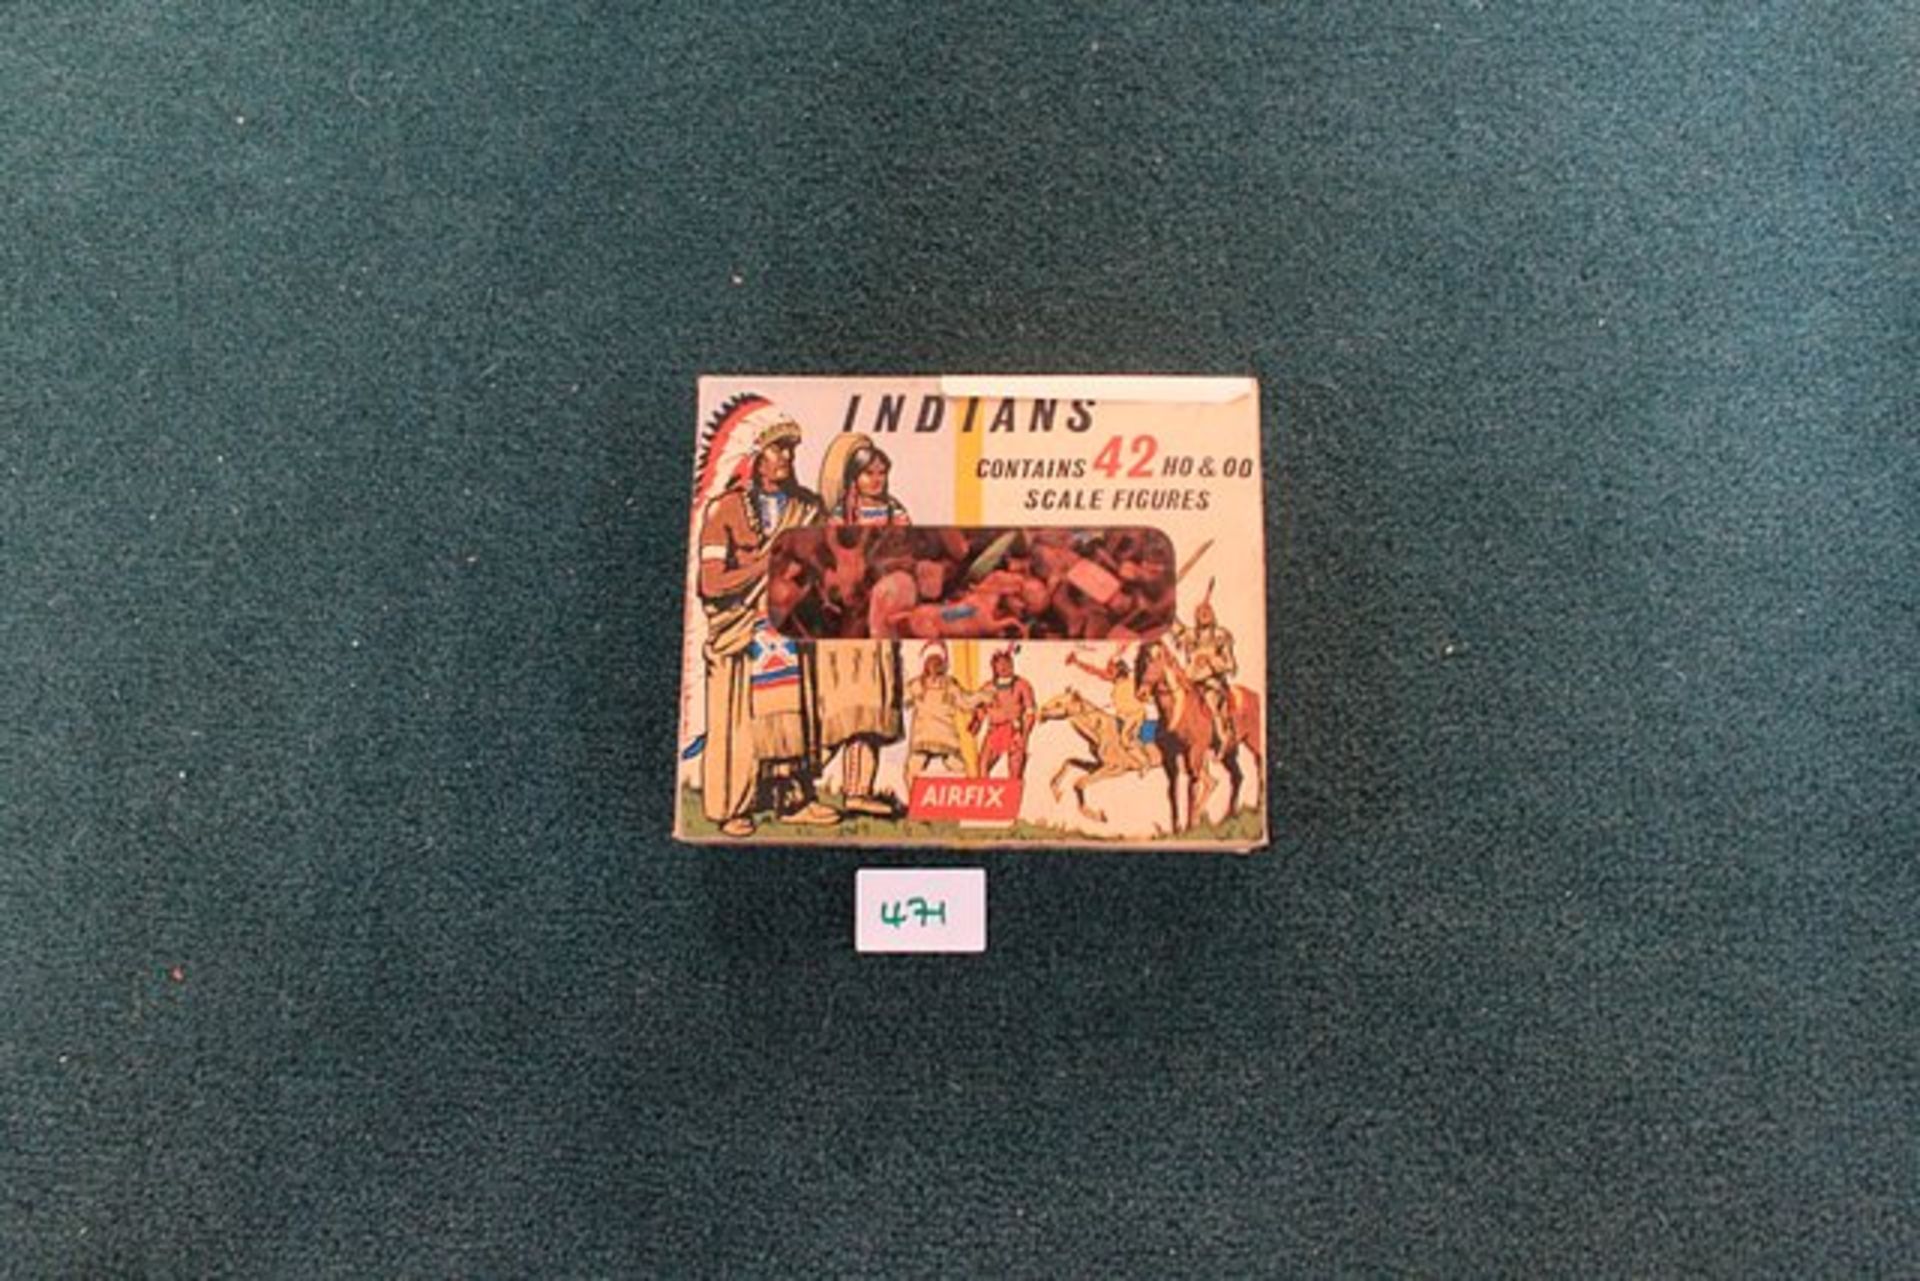 Airfix Model Kit Containing 42 H0-00 Scale Cowboys Figures Complete In Box